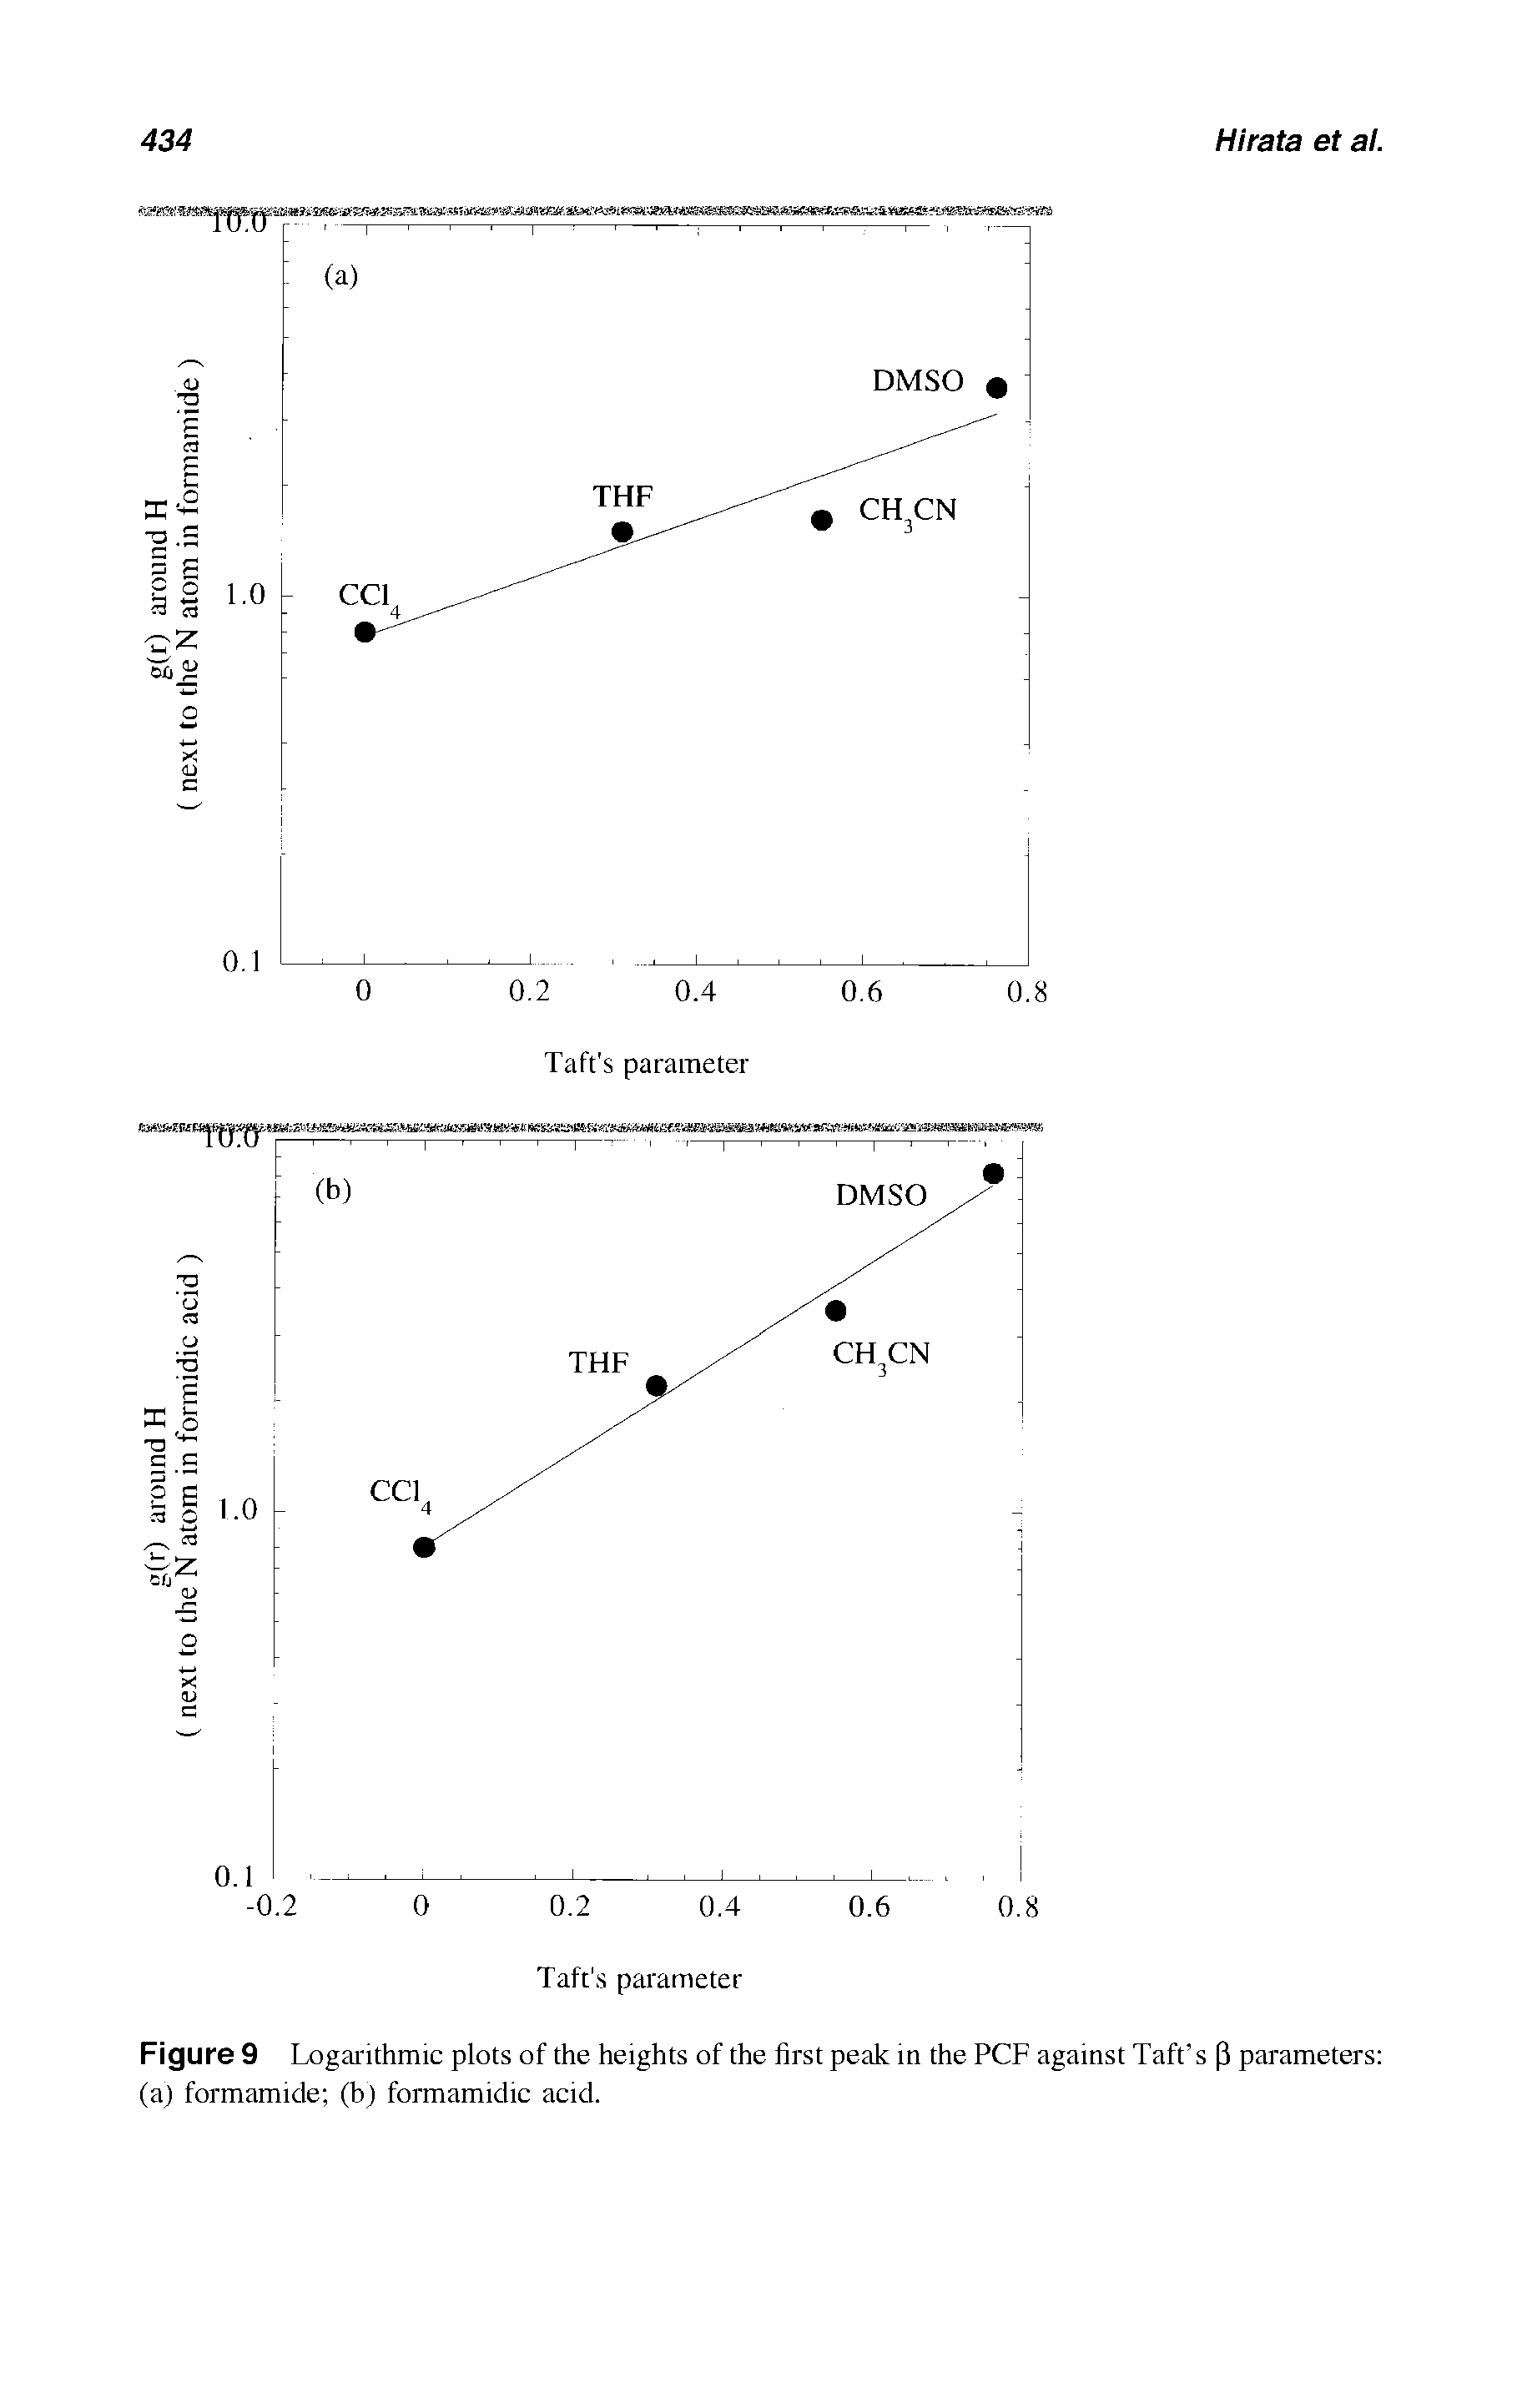 Figure 9 Logarithmic plots of the heights of the first peak m the PCF against Taft s (1 parameters (a) formamide (b) formamidic acid.